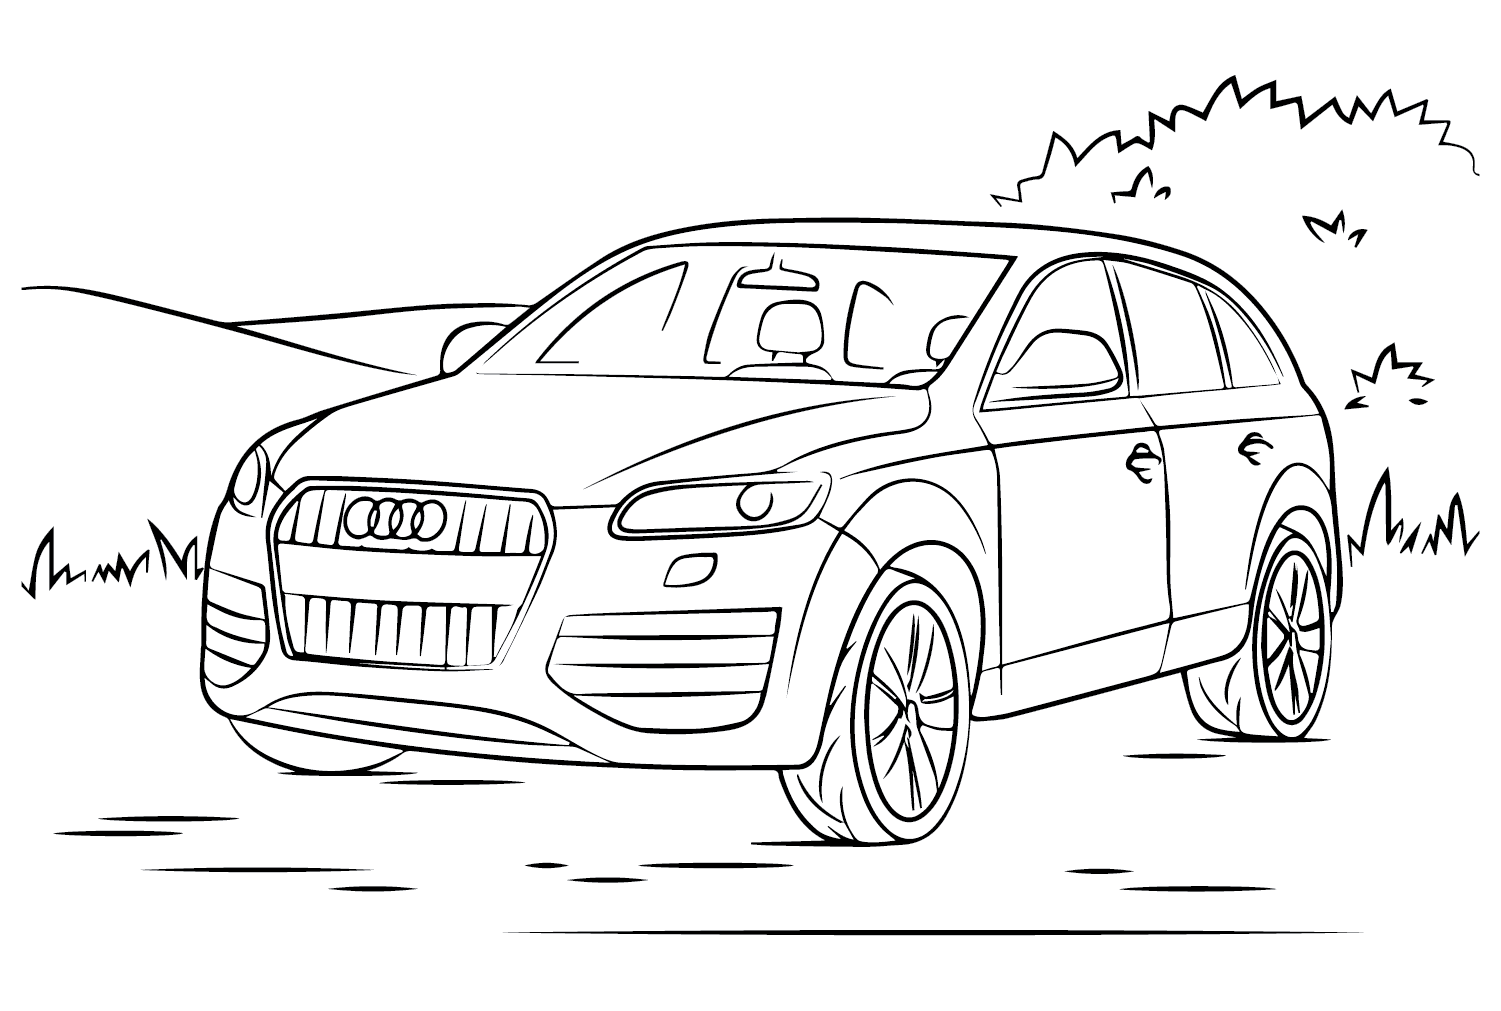 Audi Q7 Coloring Page Free - Free Printable Coloring Pages